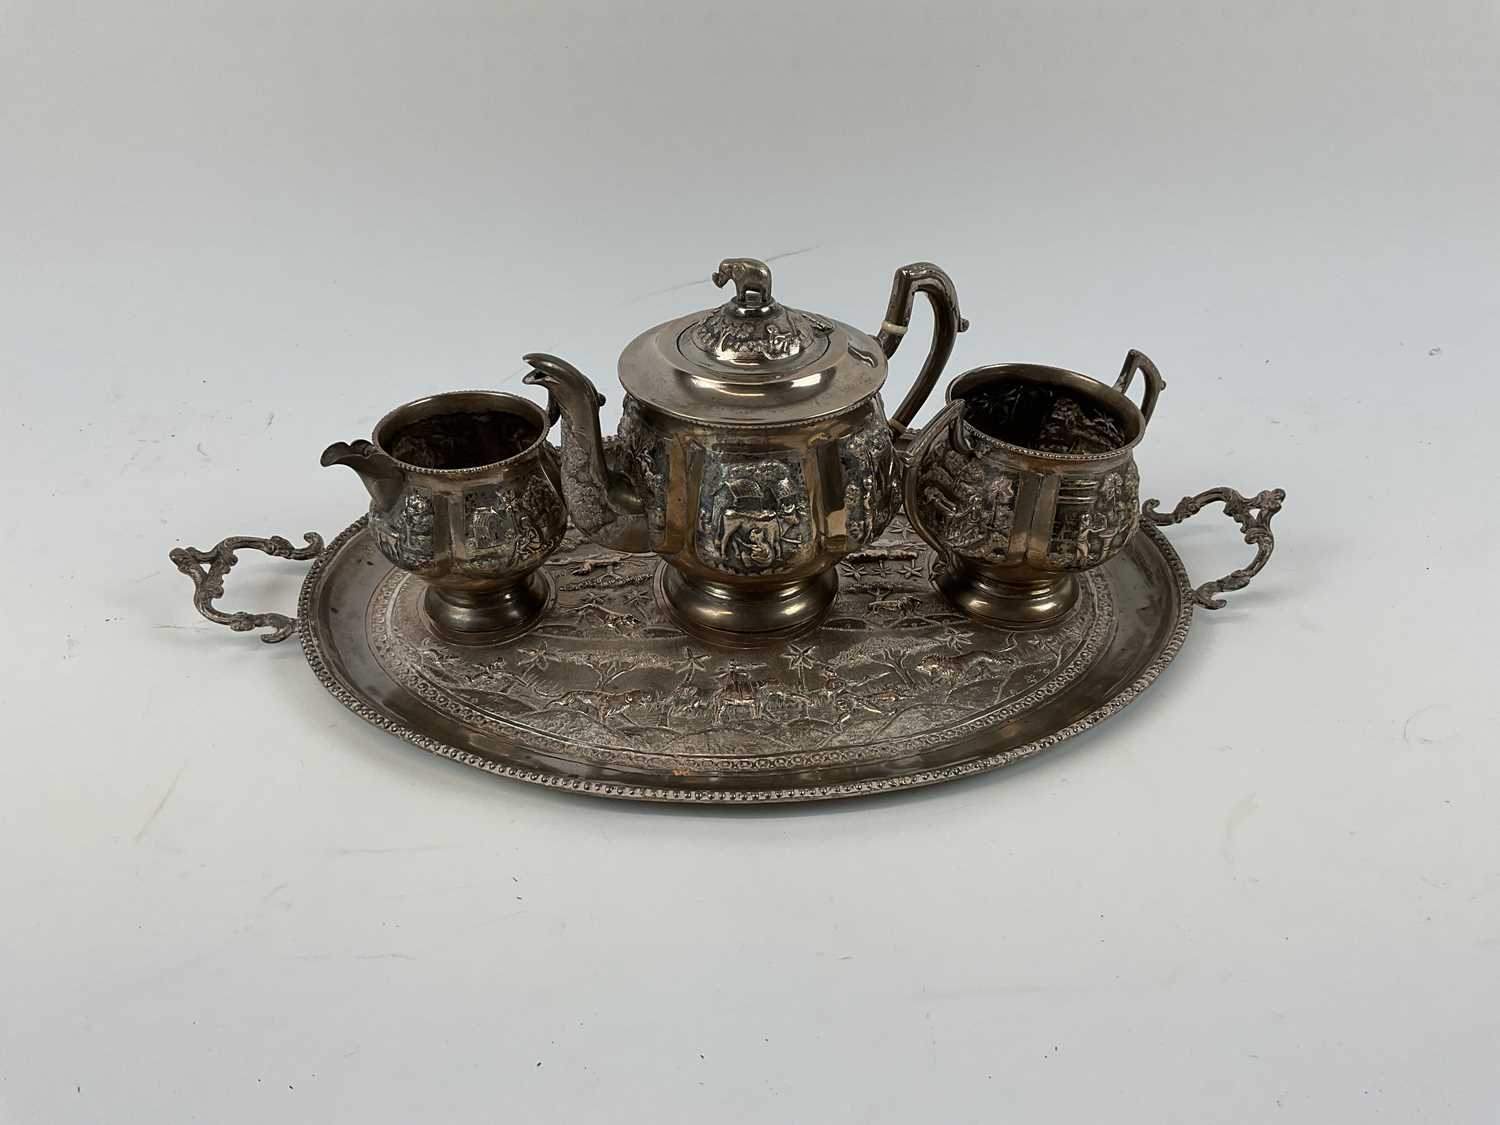 X An Indian silver four piece tea service, decorated with typical scenes of animals and village